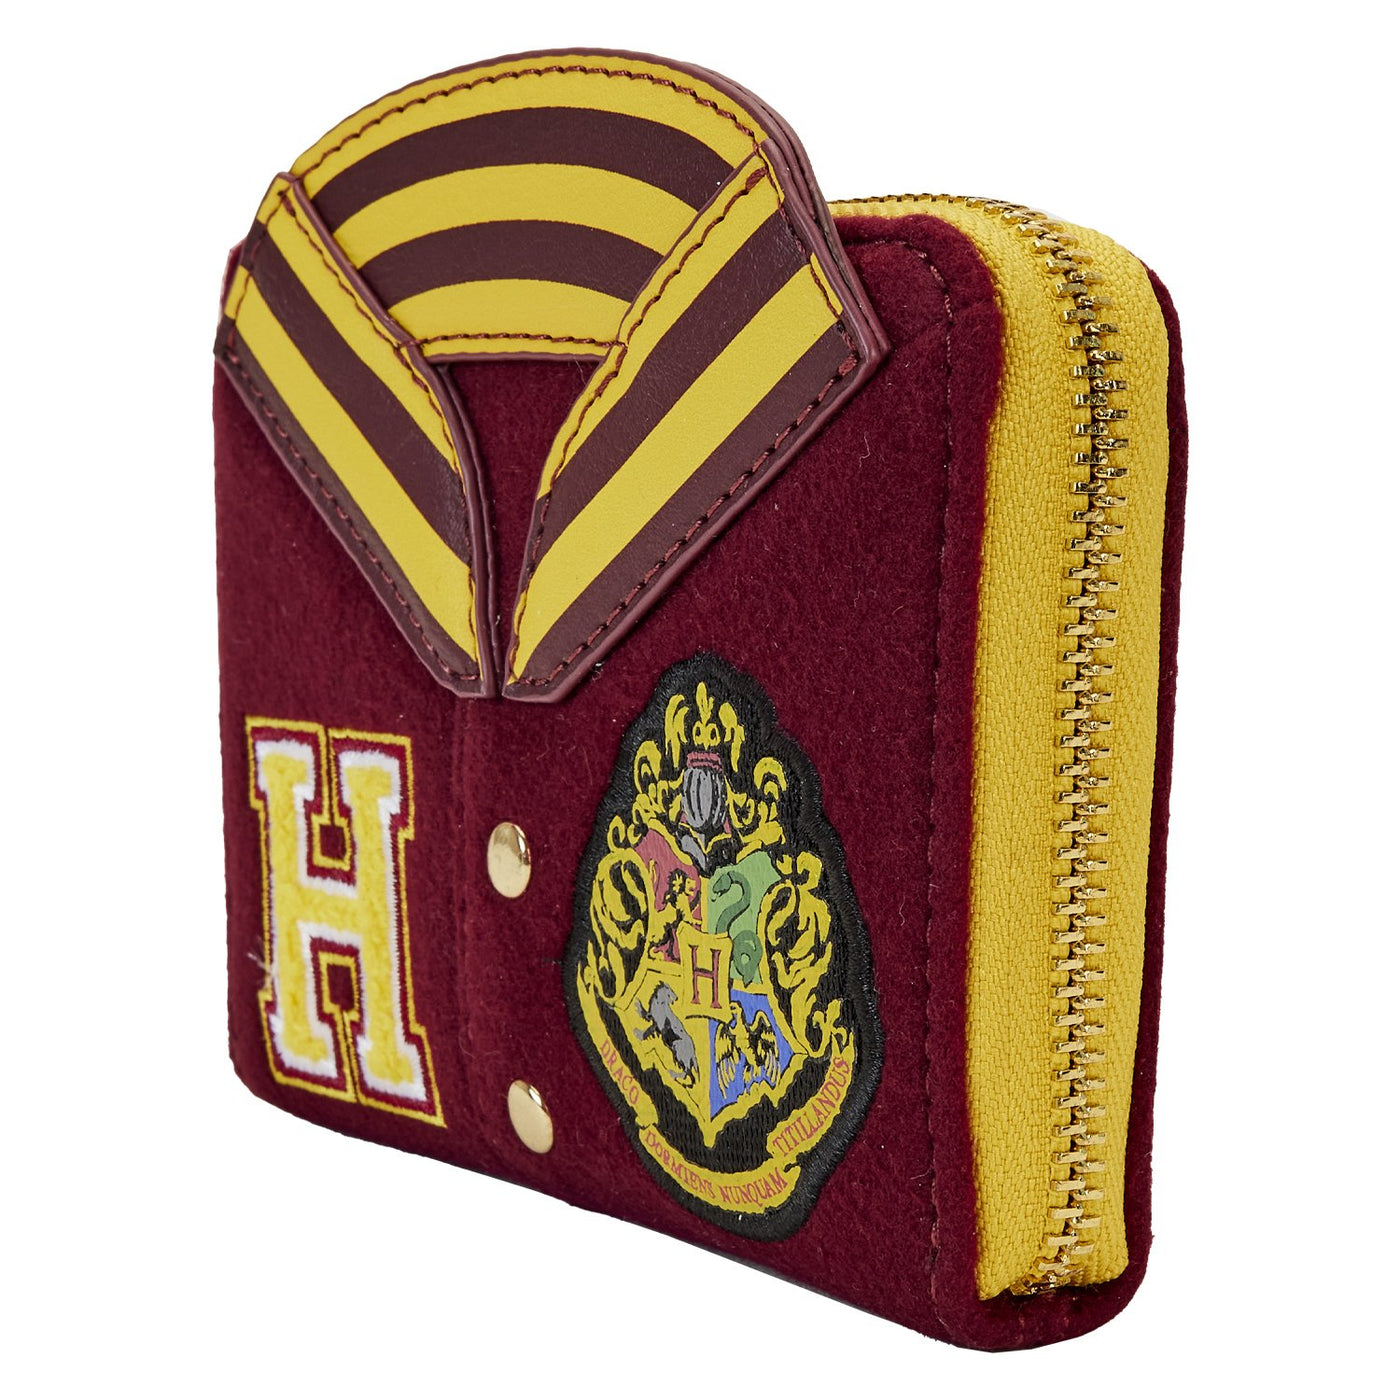 Loungefly Warner Brothers Harry Potter Gryffindor Varsity Zip-Around Wallet - Side View